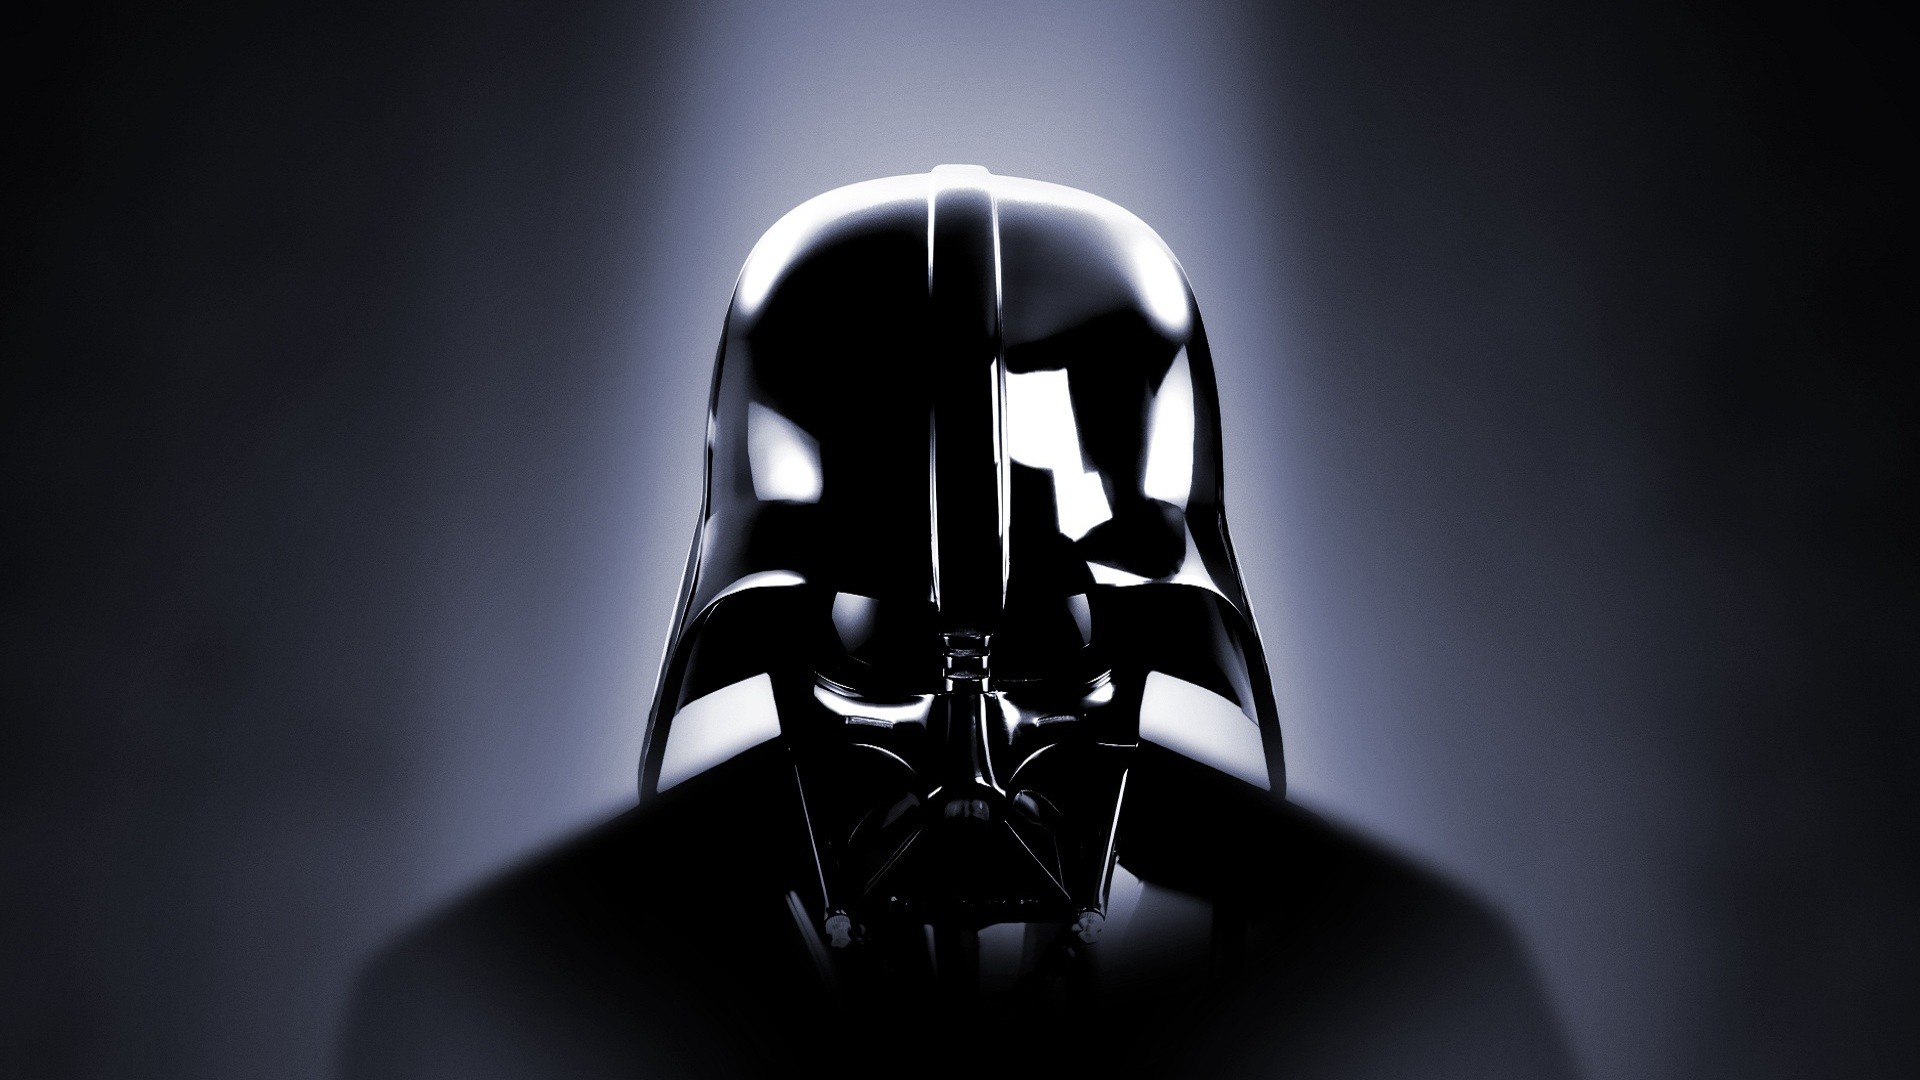 Download the best Darth Vader Wallpapers media for free. View and share our Darth  Vader